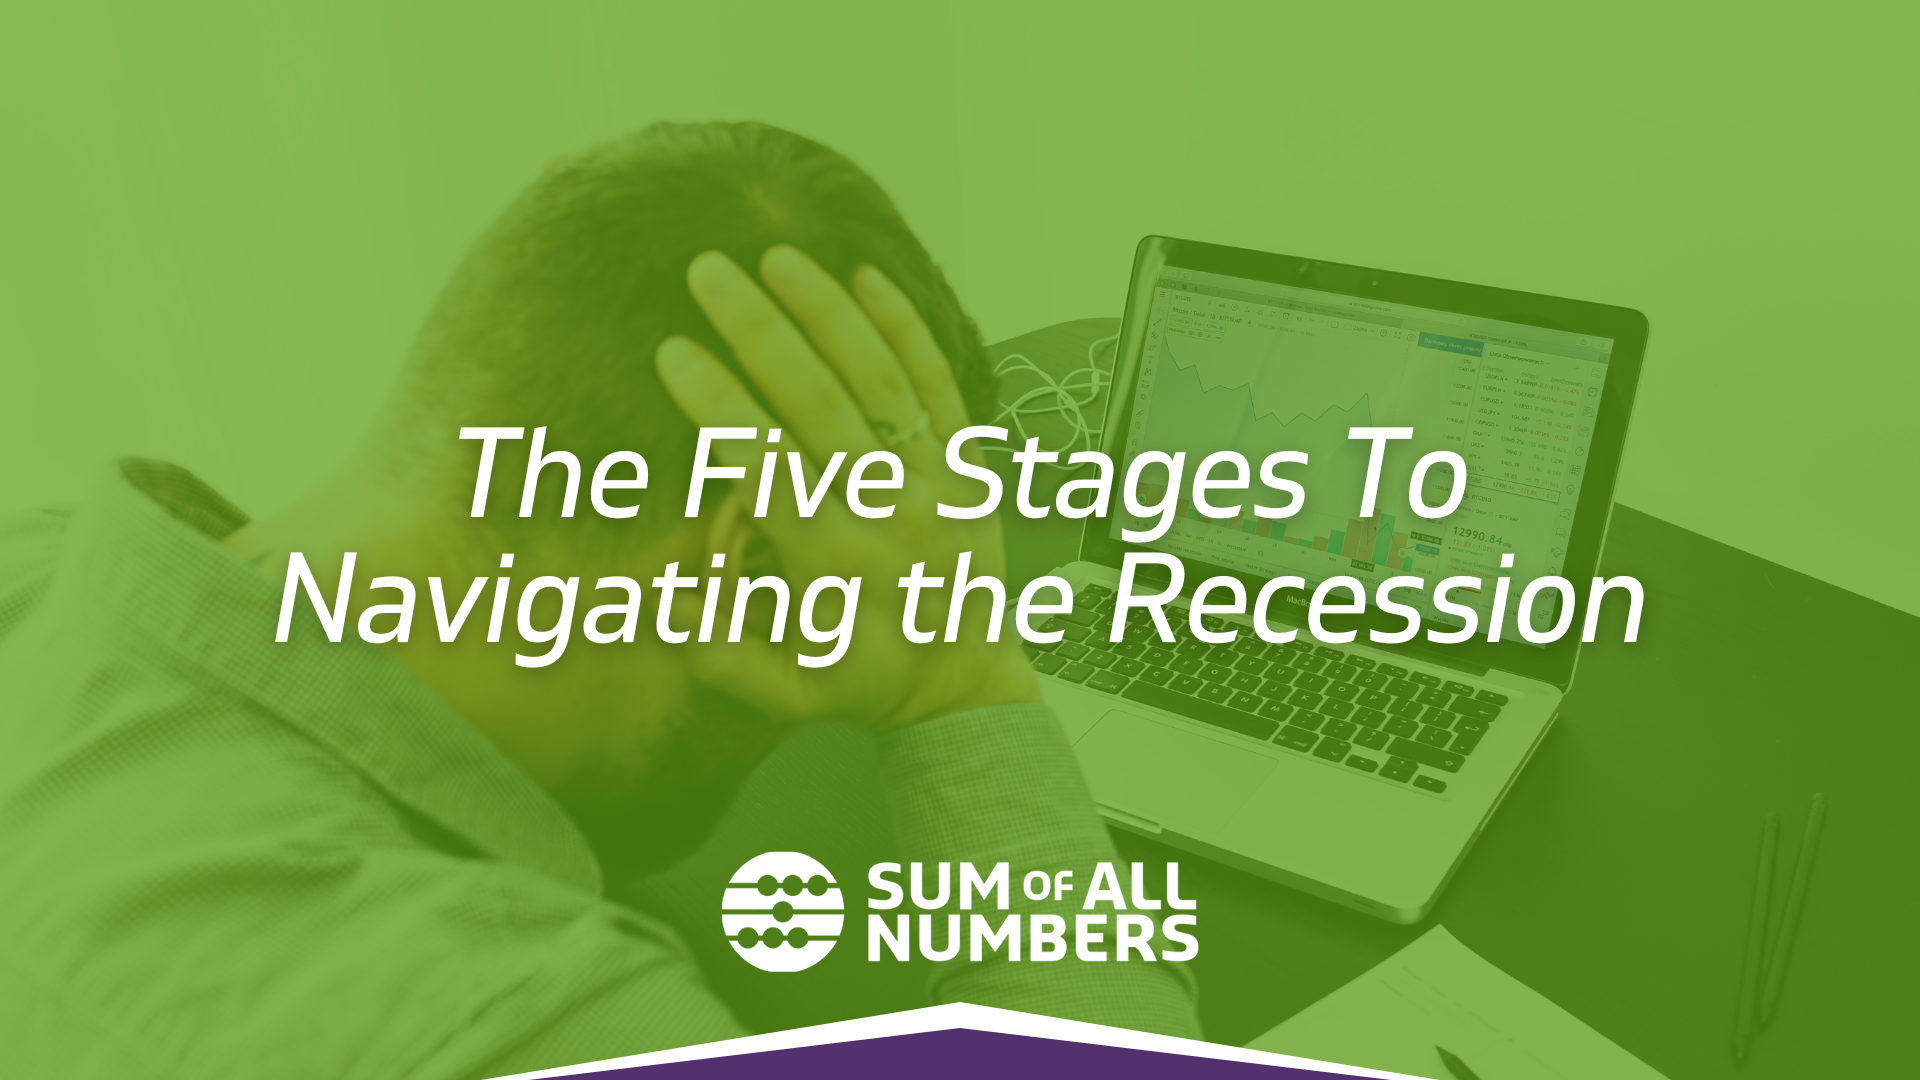 The Five Stages To Navigating the Recession